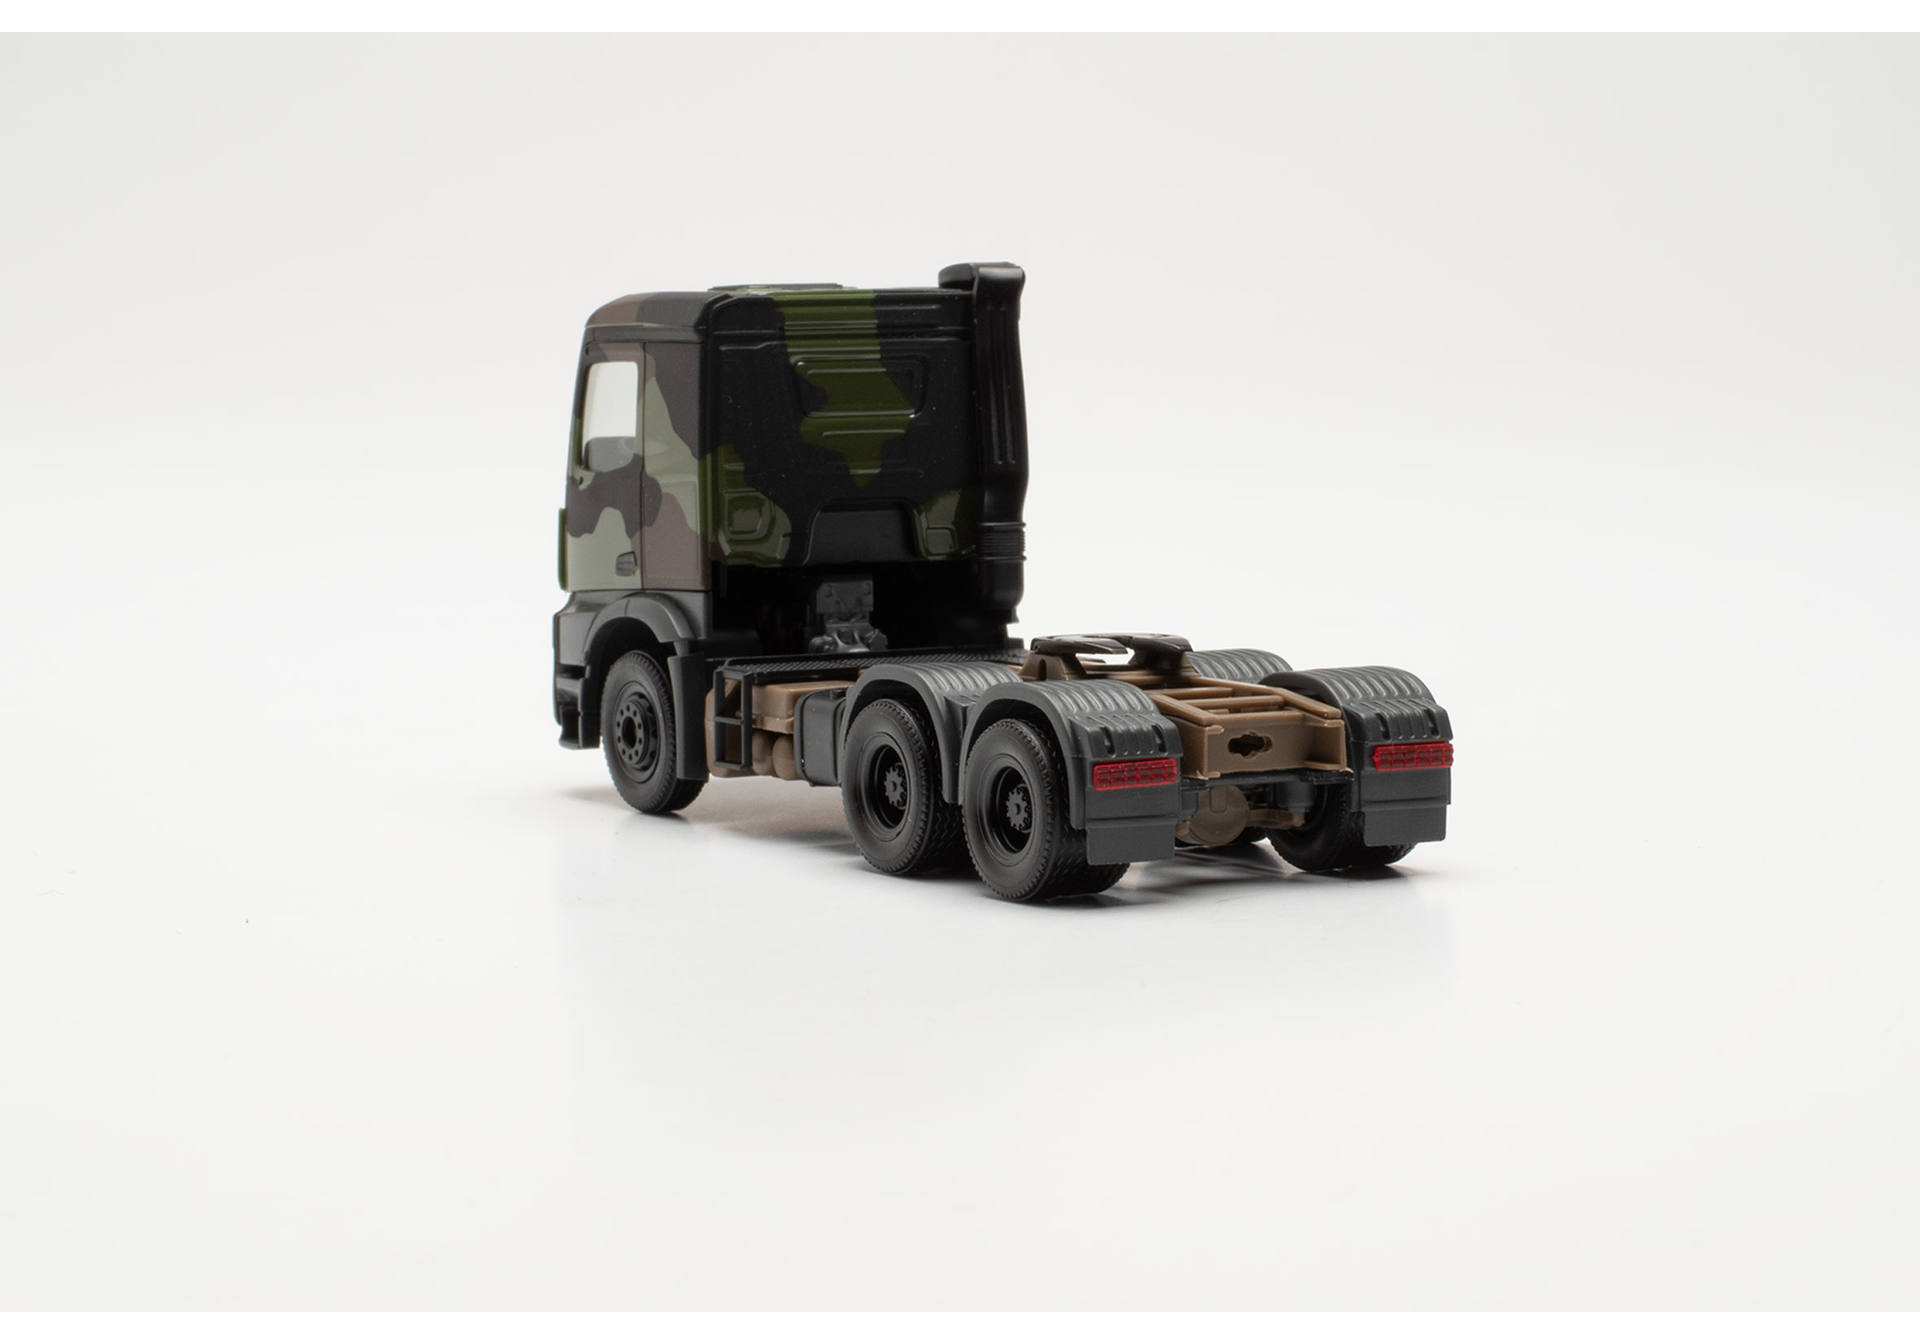 Mercedes-Benz Arocs 6x4 rigid tractor "German Armed Forces", camouflage